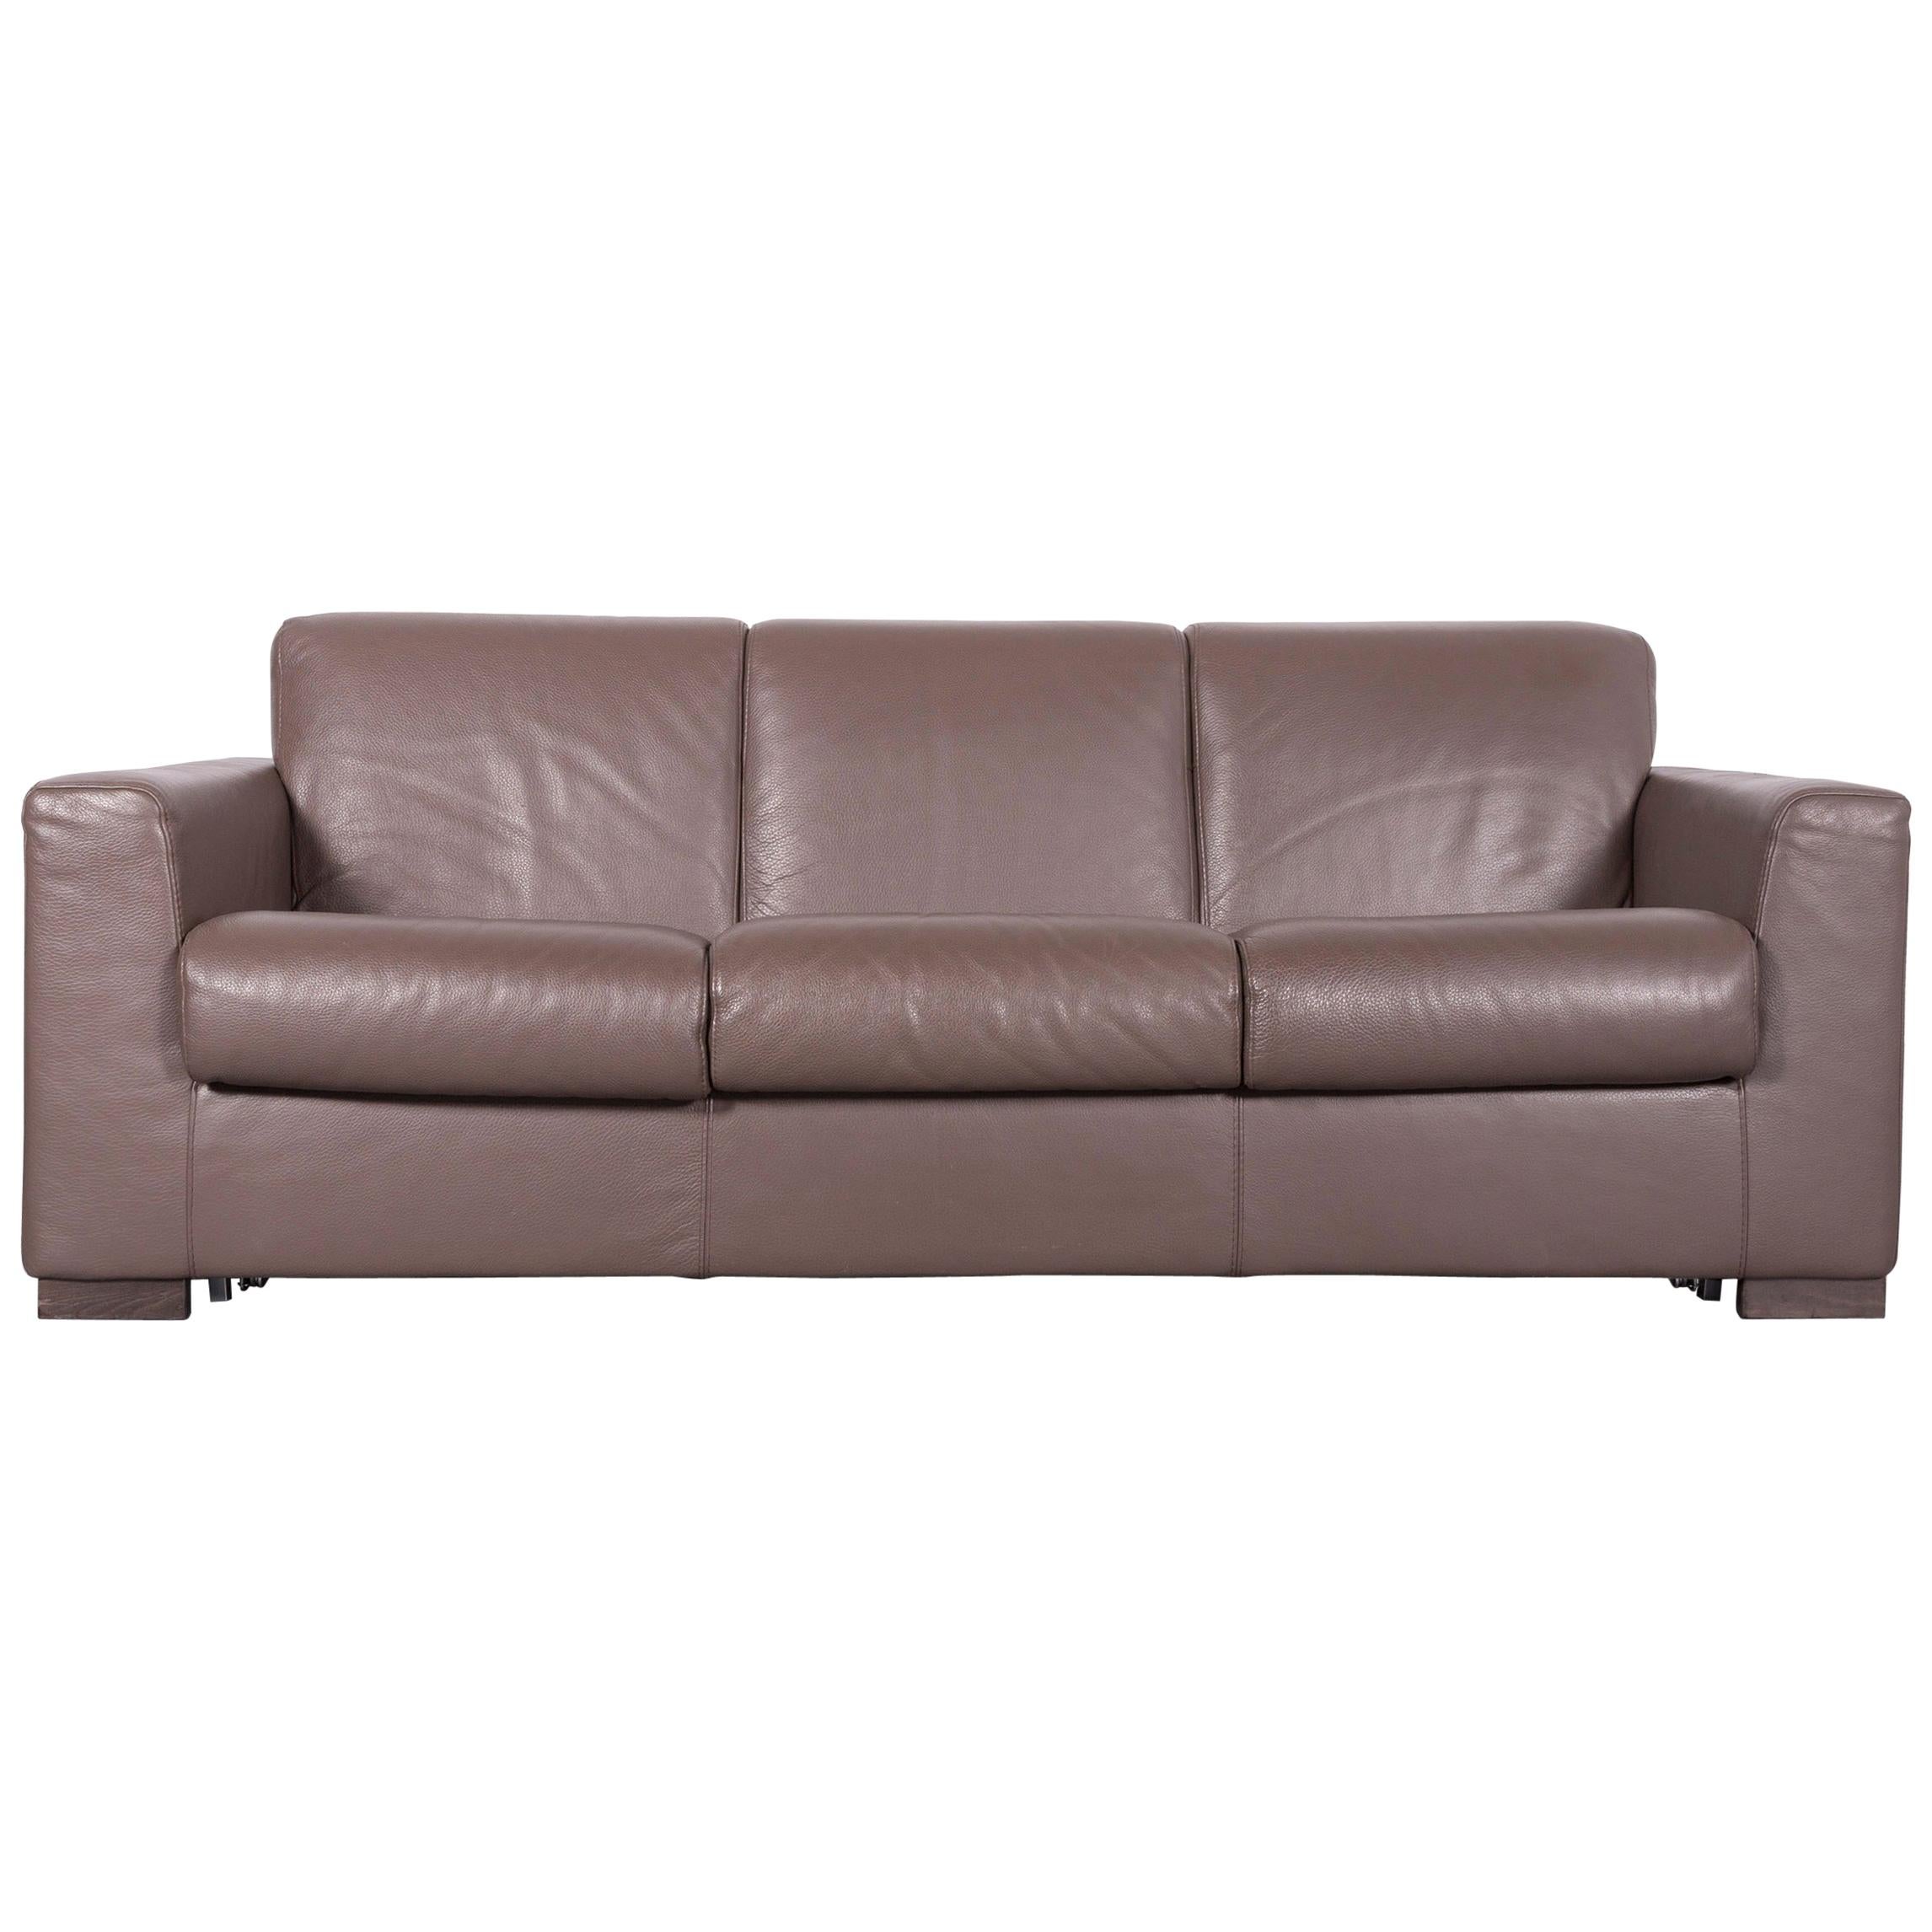 Natuzzi Designer Leather Sofa Three-Seat Couch Brown with Sleep Function